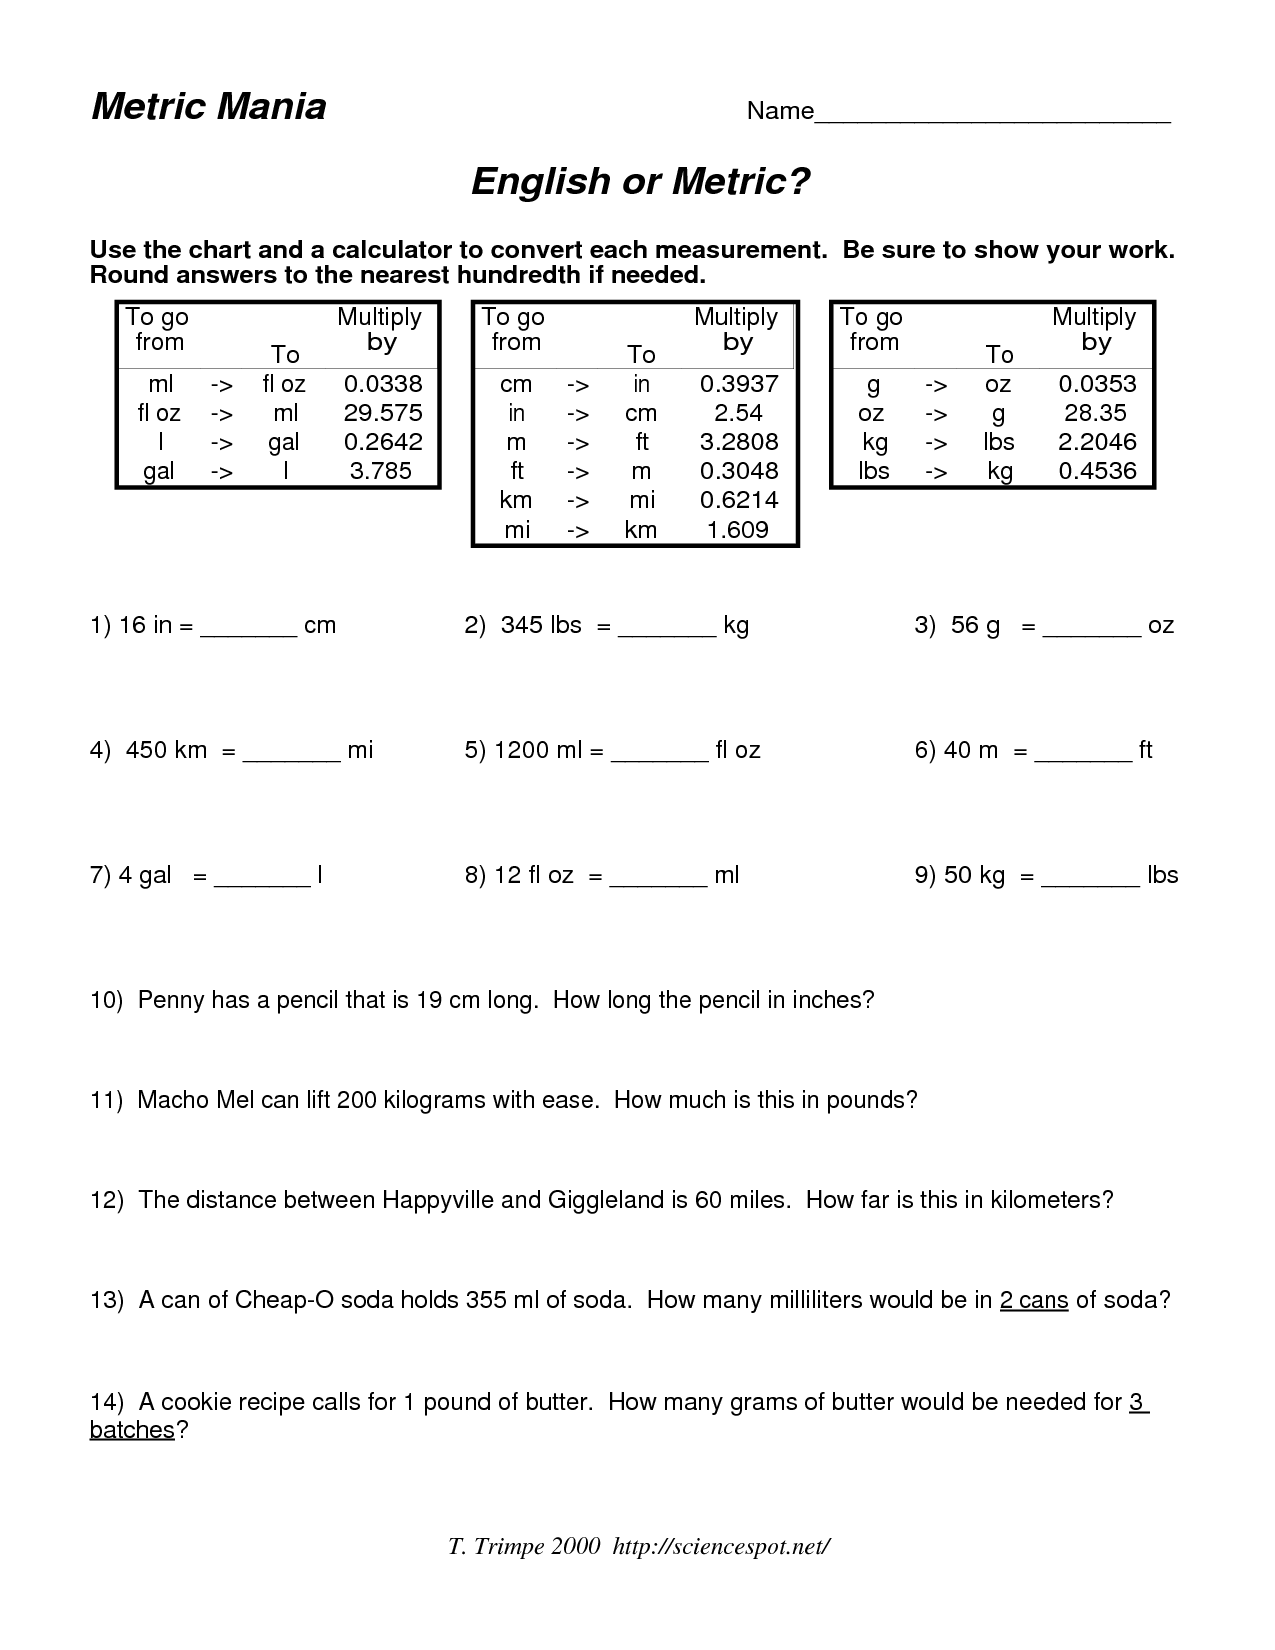 Metric System Conversion Worksheet Answers Image